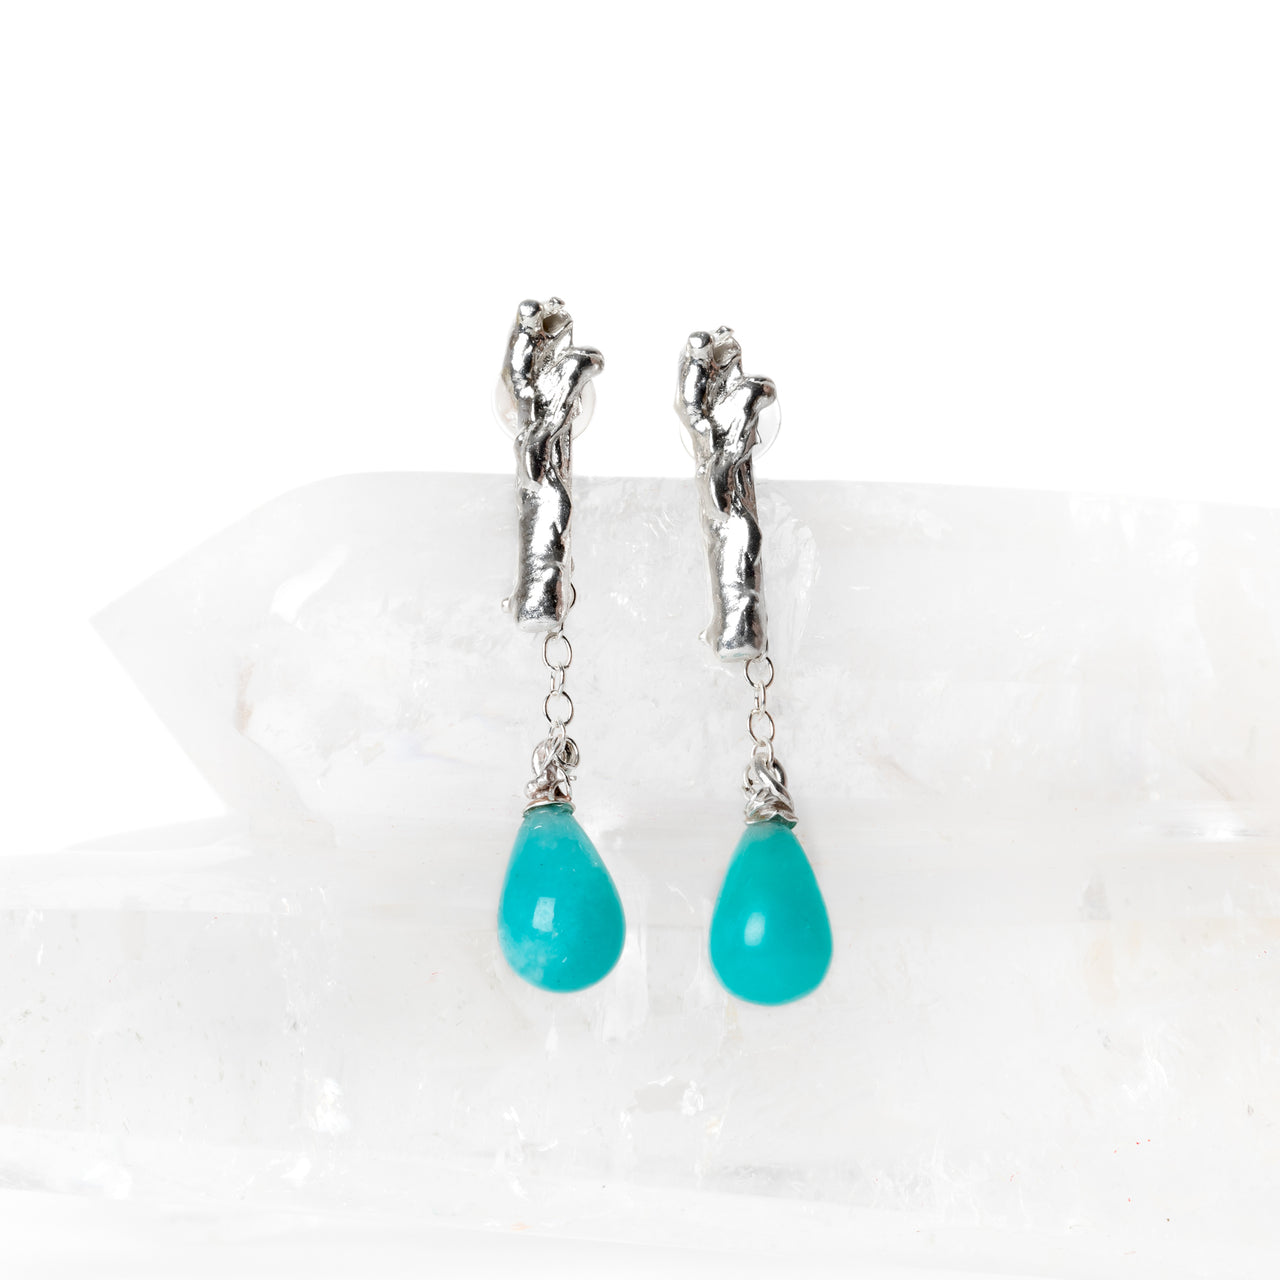 Amazonite and Recycled Silver Earrings